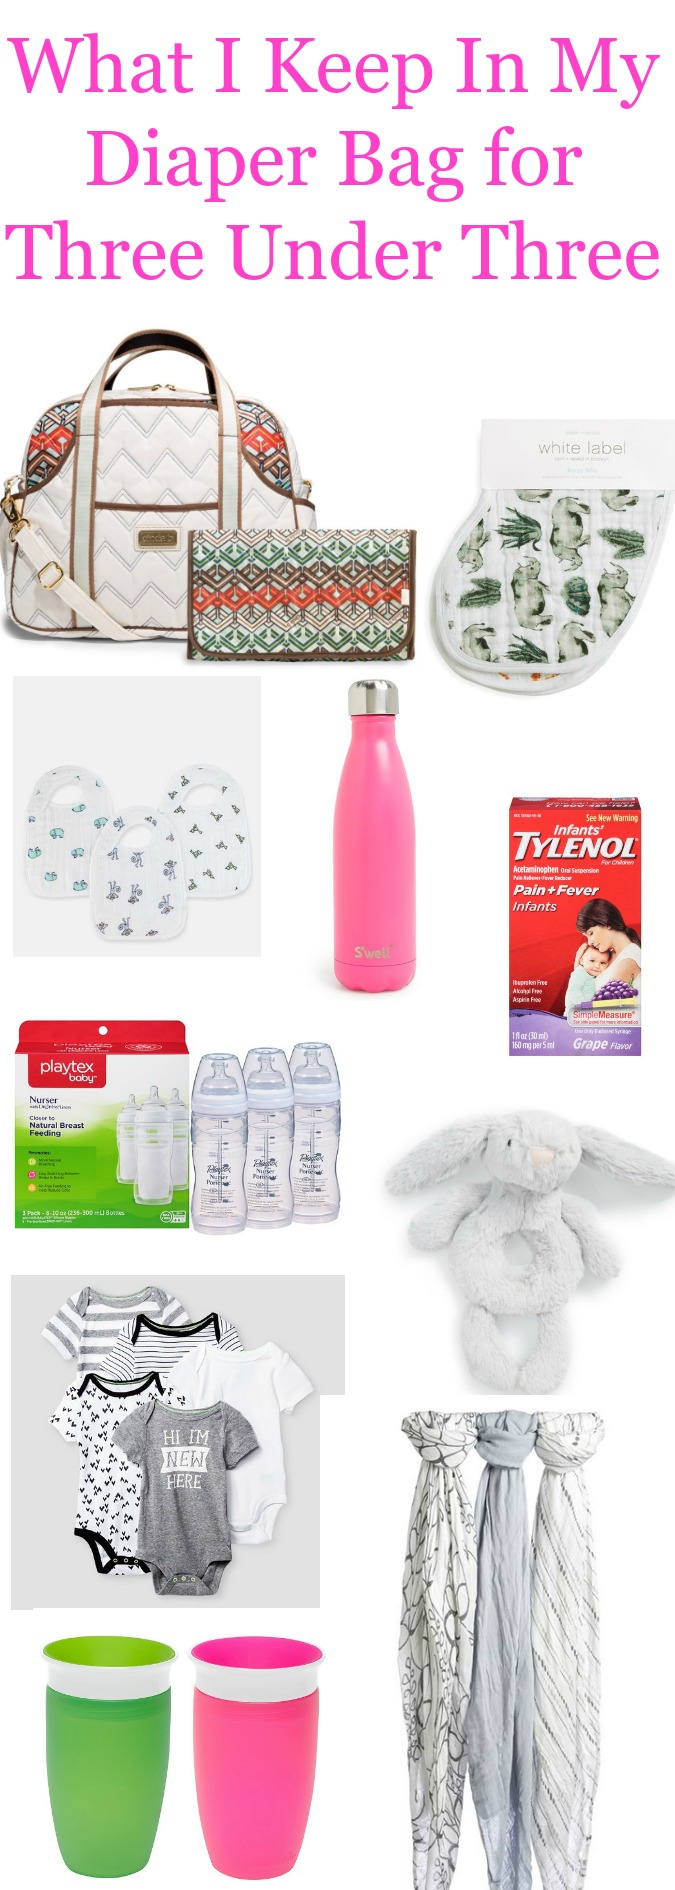 What I Keep In My Diaper Bag for Three Under Three